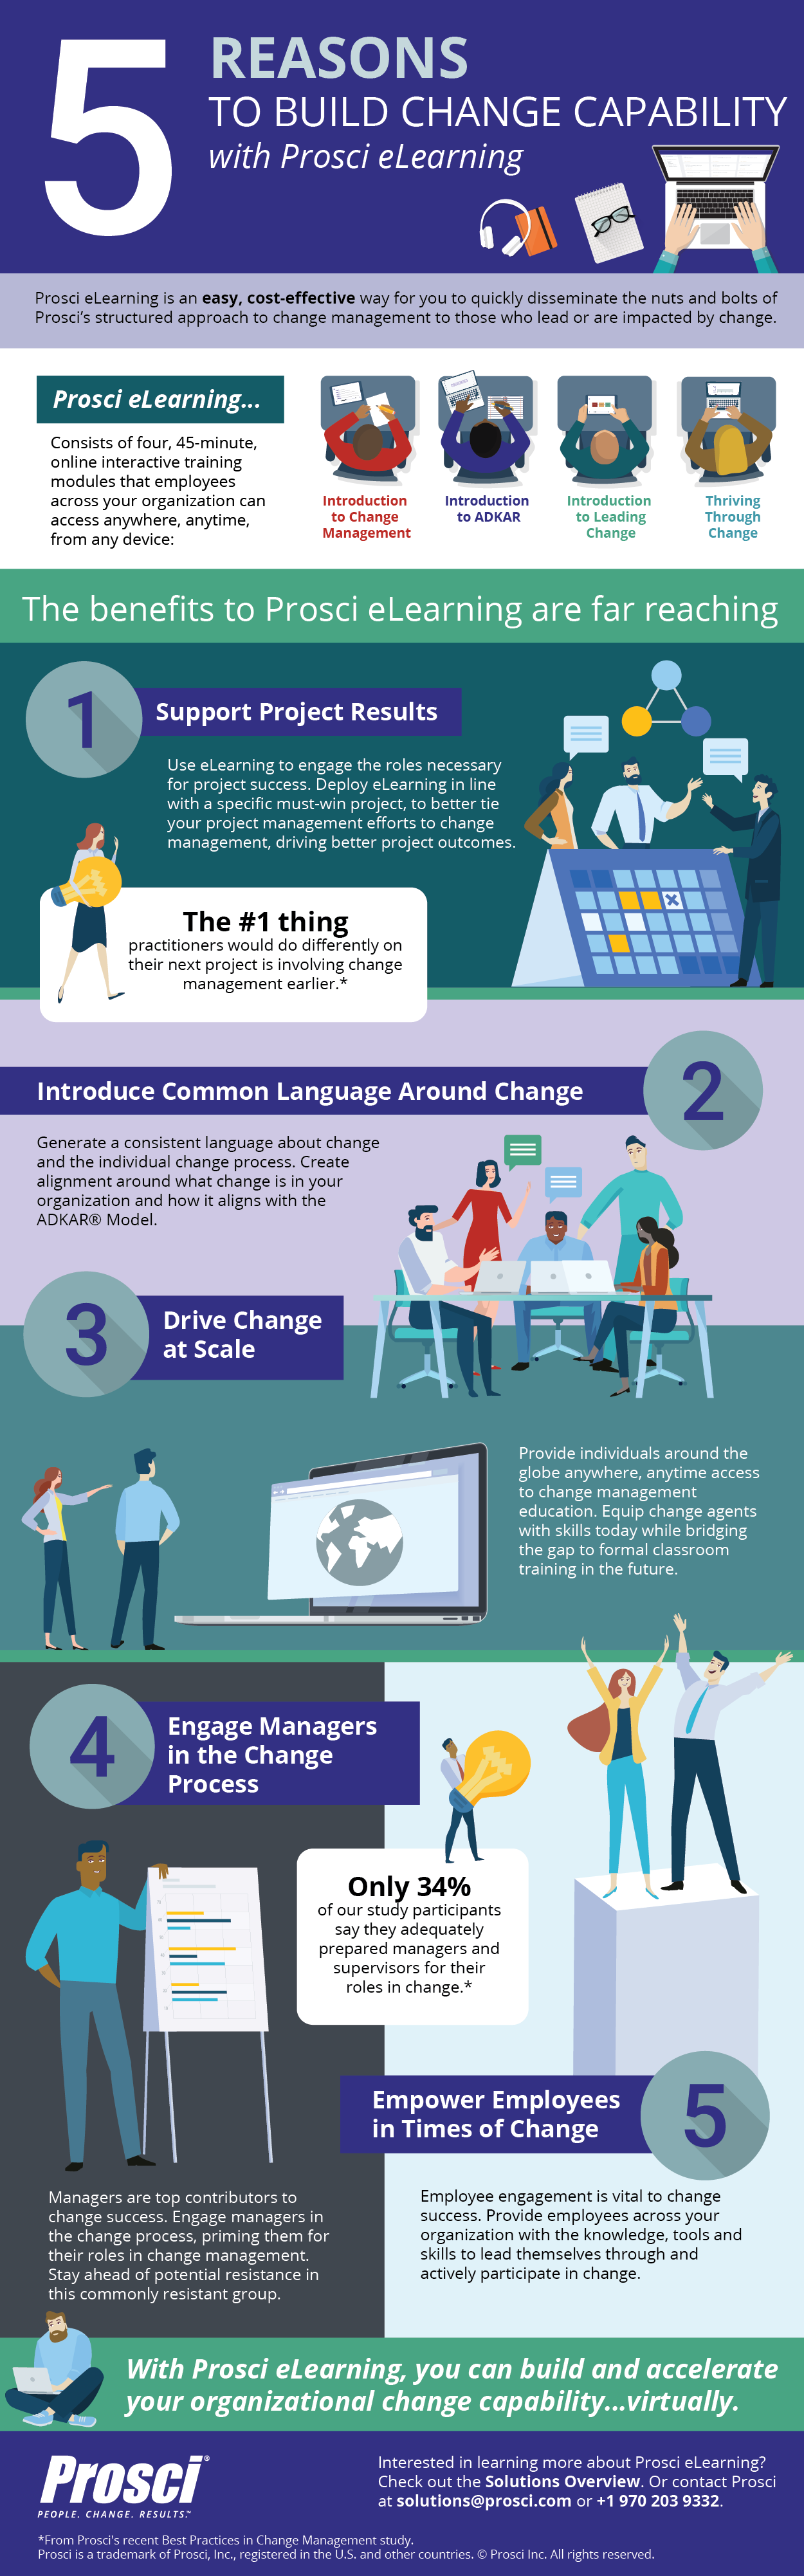 Prosci-eLearning-Infographic